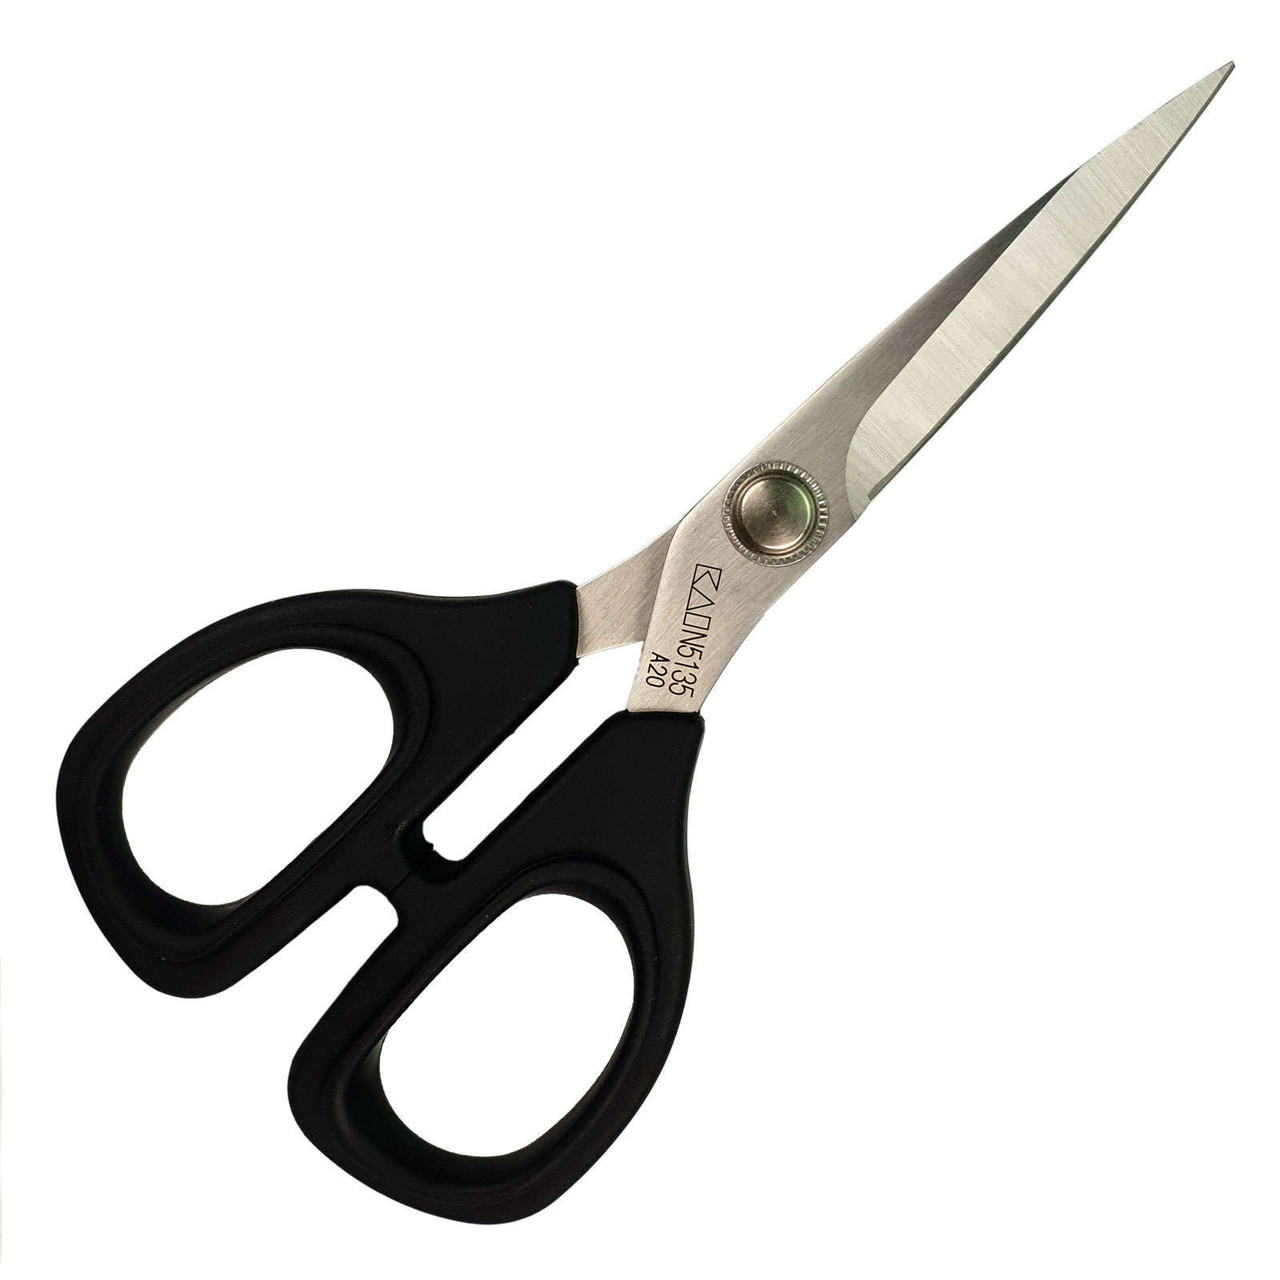 KAI Embroidery Scissors 5 1/2 Inch (135MM) Blade N5135 - Old Mill Quilting